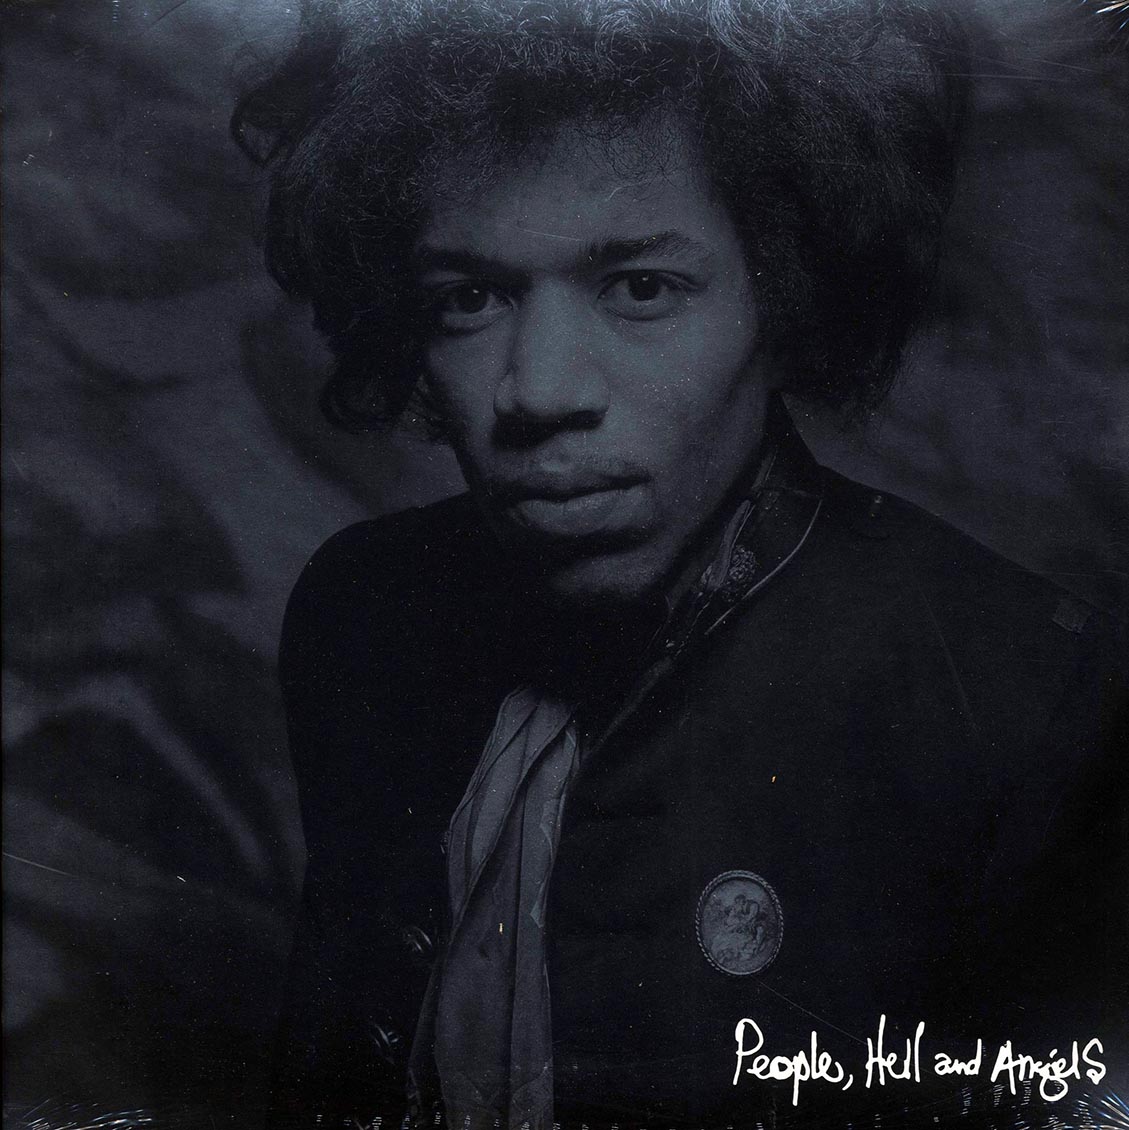 Jimi Hendrix - People, Hell And Angels (2xLP) (180g) (remastered) - Vinyl LP